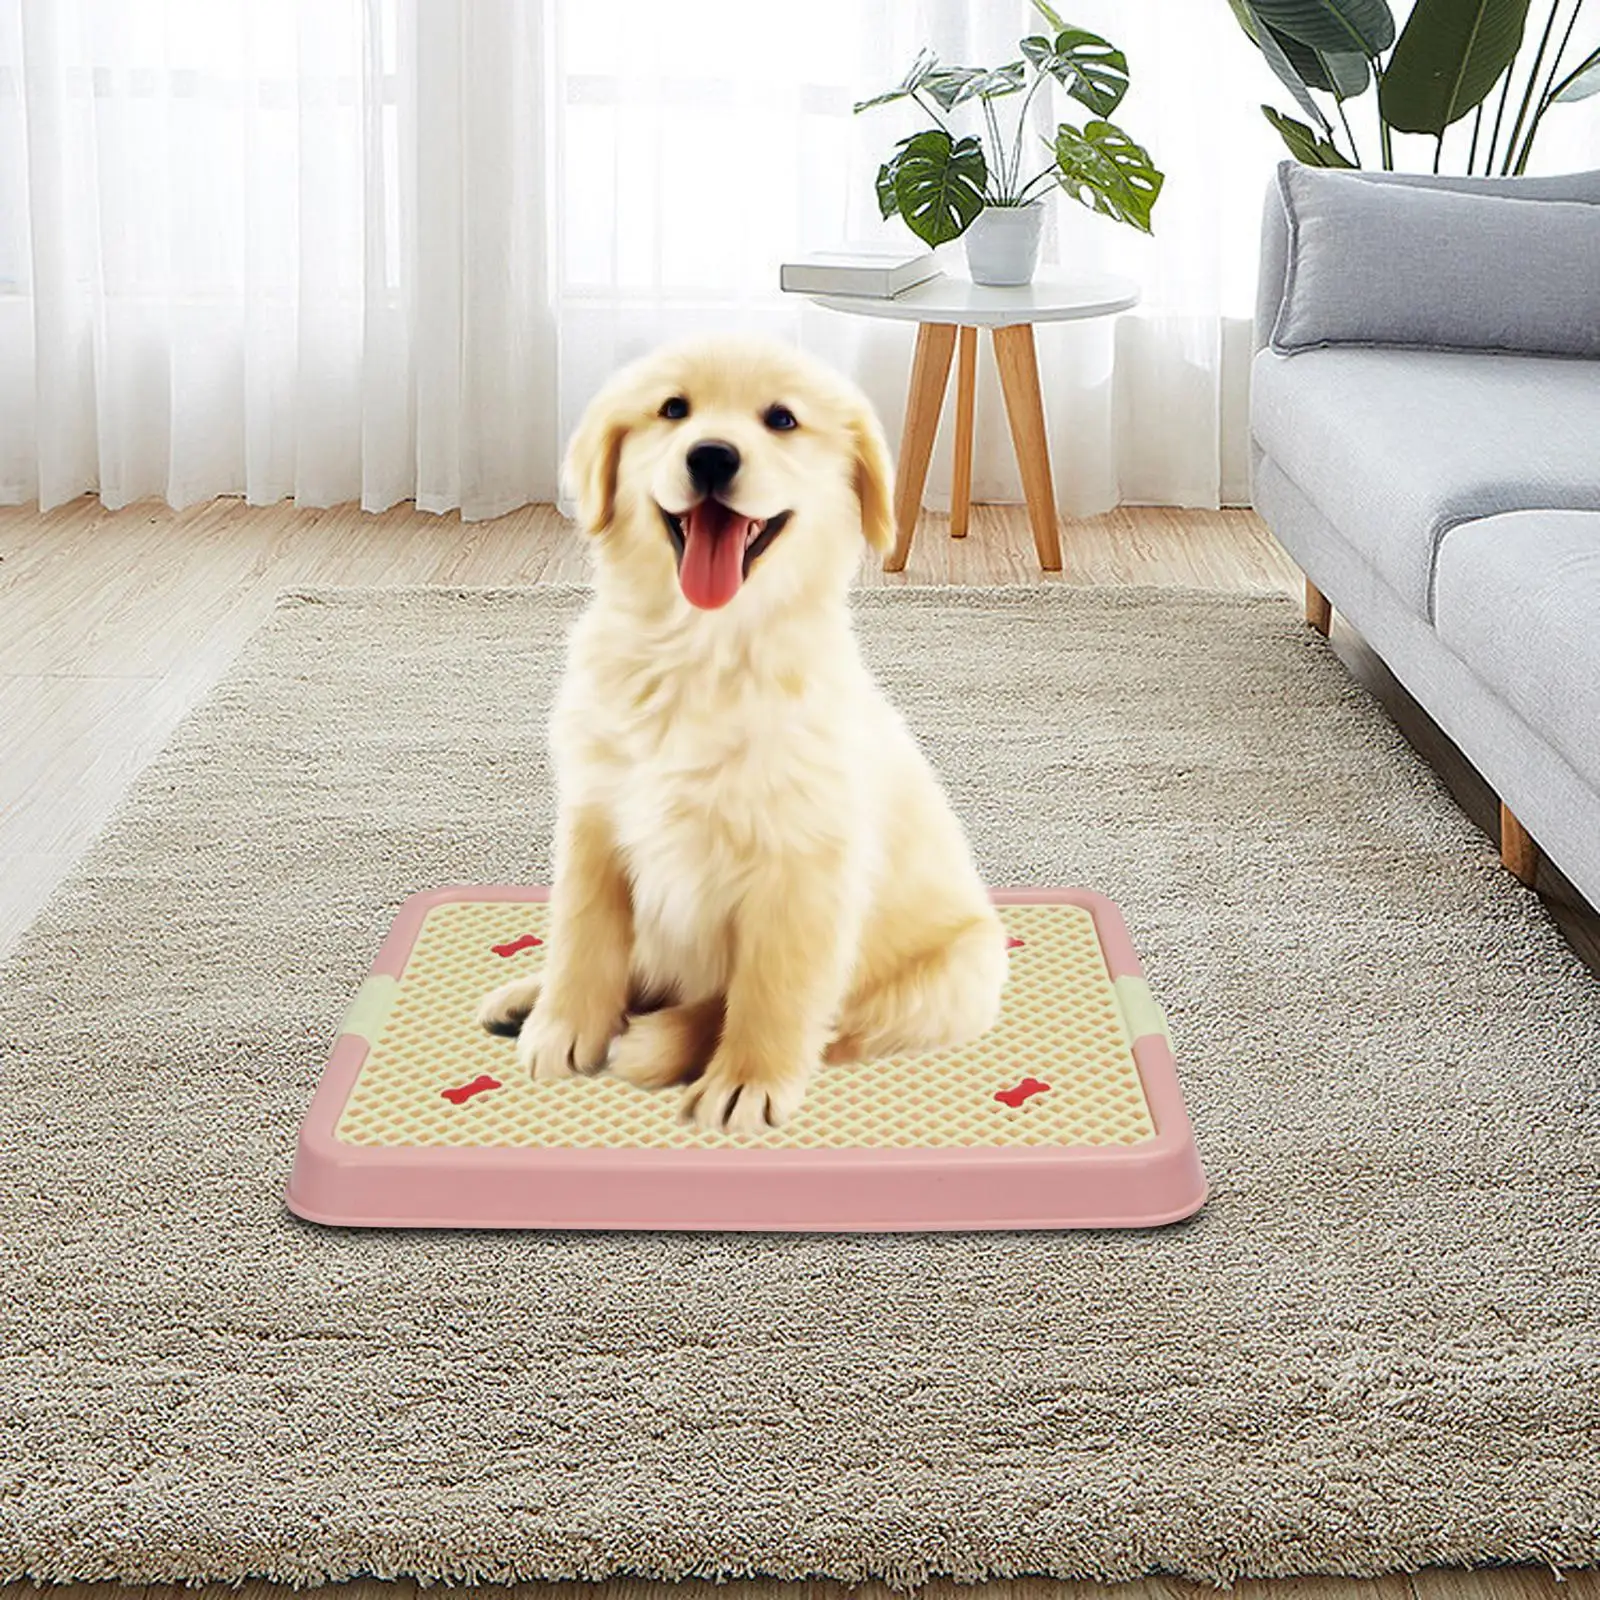 Pet Toilet Puppy Training Potty Tray Pet Supplies Indoor Outdoor Washable Bedpan